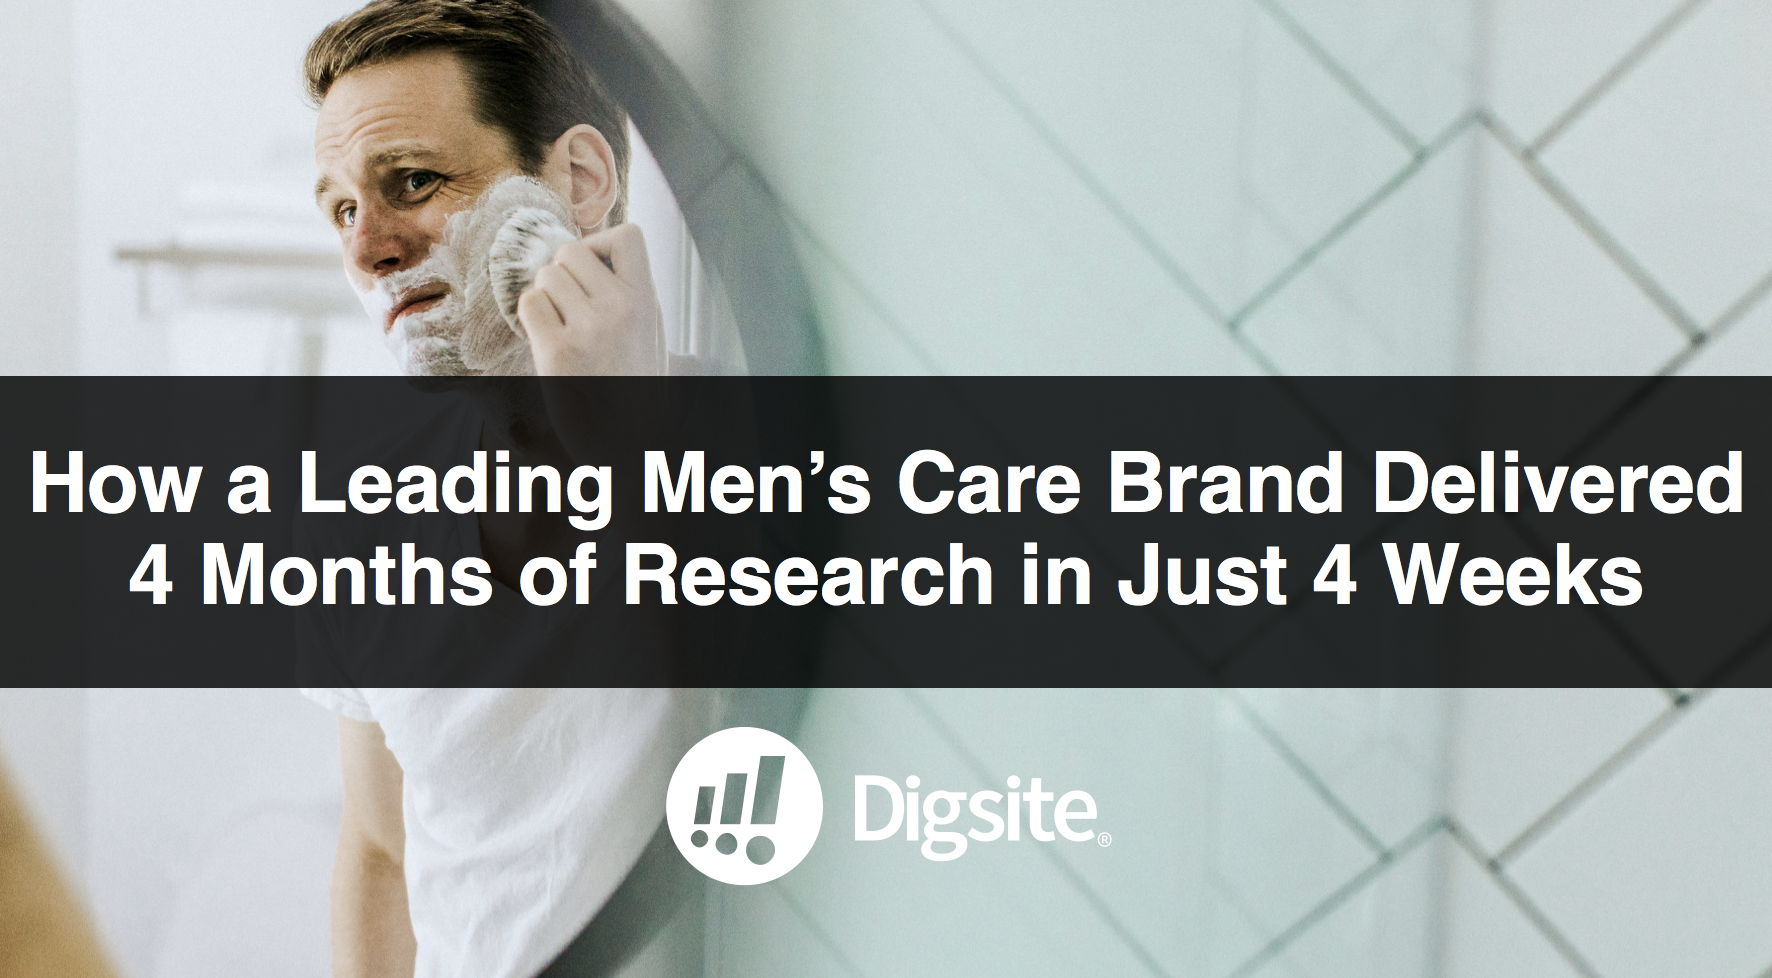 How a Leading Men’s Care Brand Delivered 4 Months of Research in Just 4 Weeks